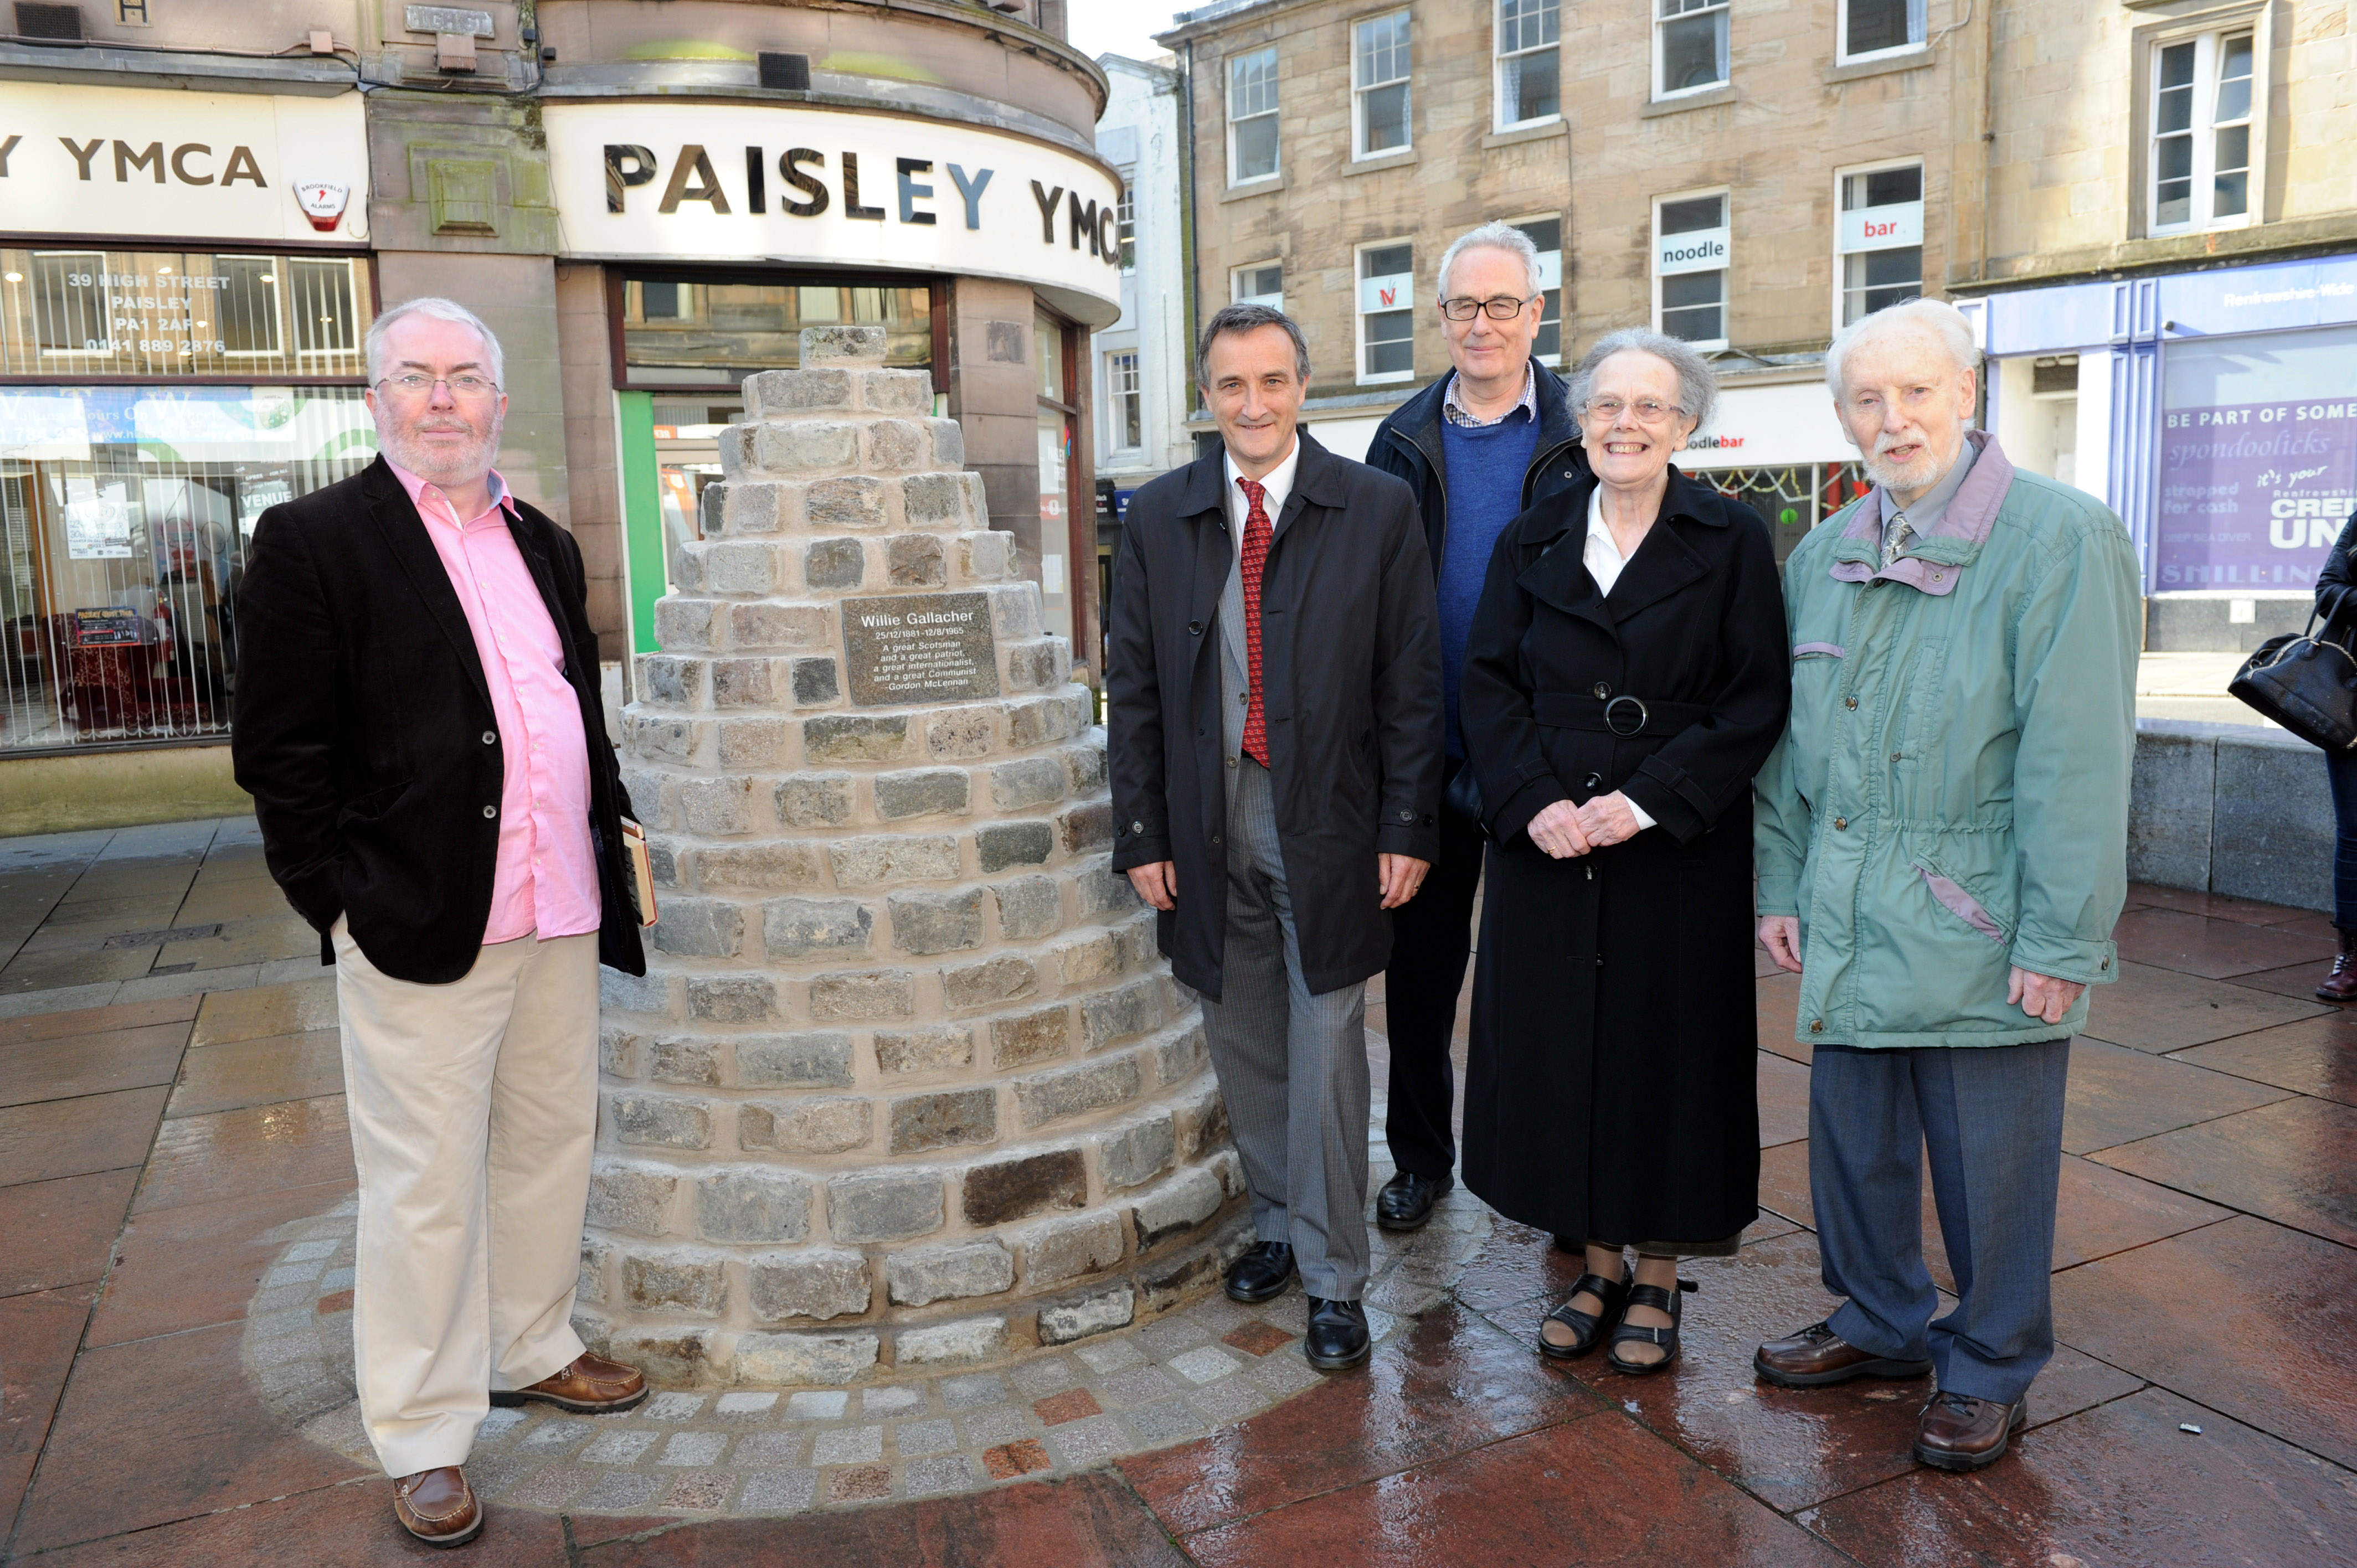 (l-r): Stewart MacLennan (Scottish Labour History Society), Councillor Michael Holmes (Renfrewshire Council Depute Leader), John Foster (Morning Star), Audrey and Eric Canning (Custodians of the Willie Gallacher Memorial Library)